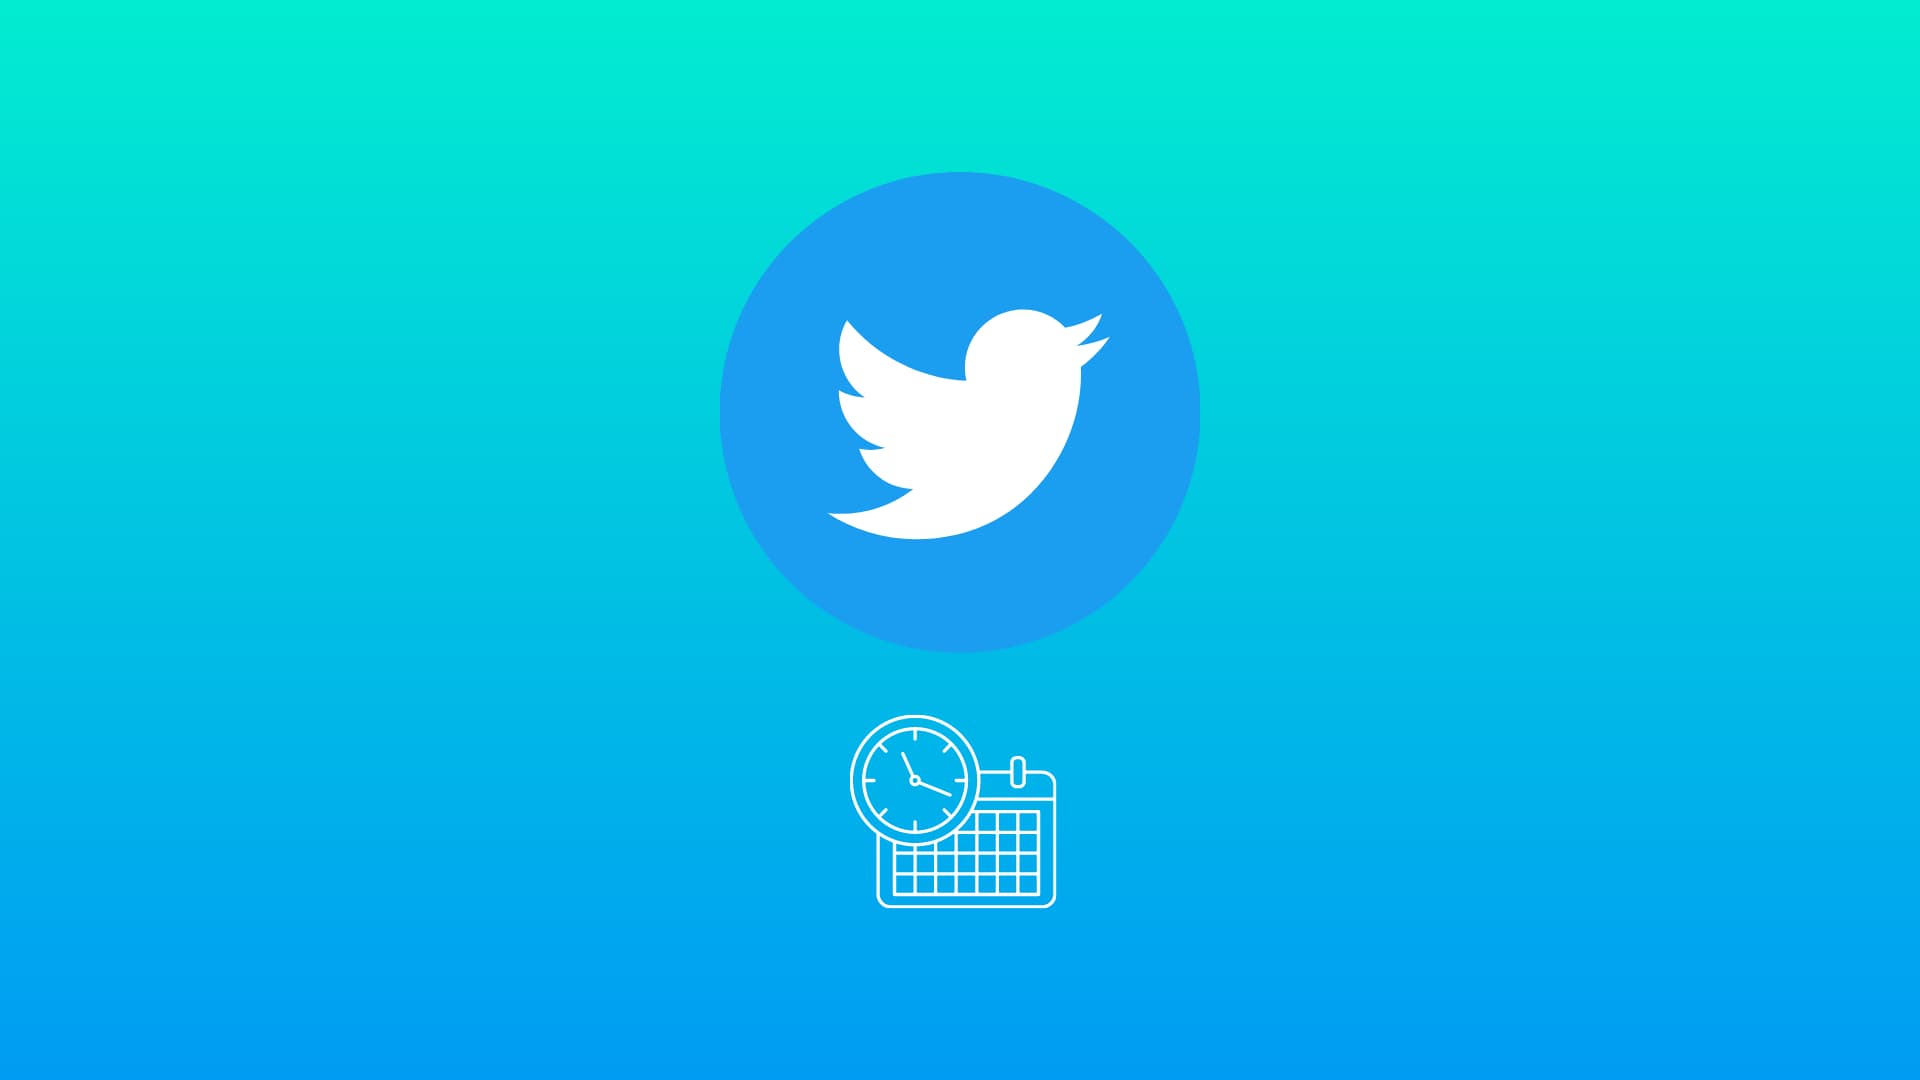 Twitter logo with a schedule icon